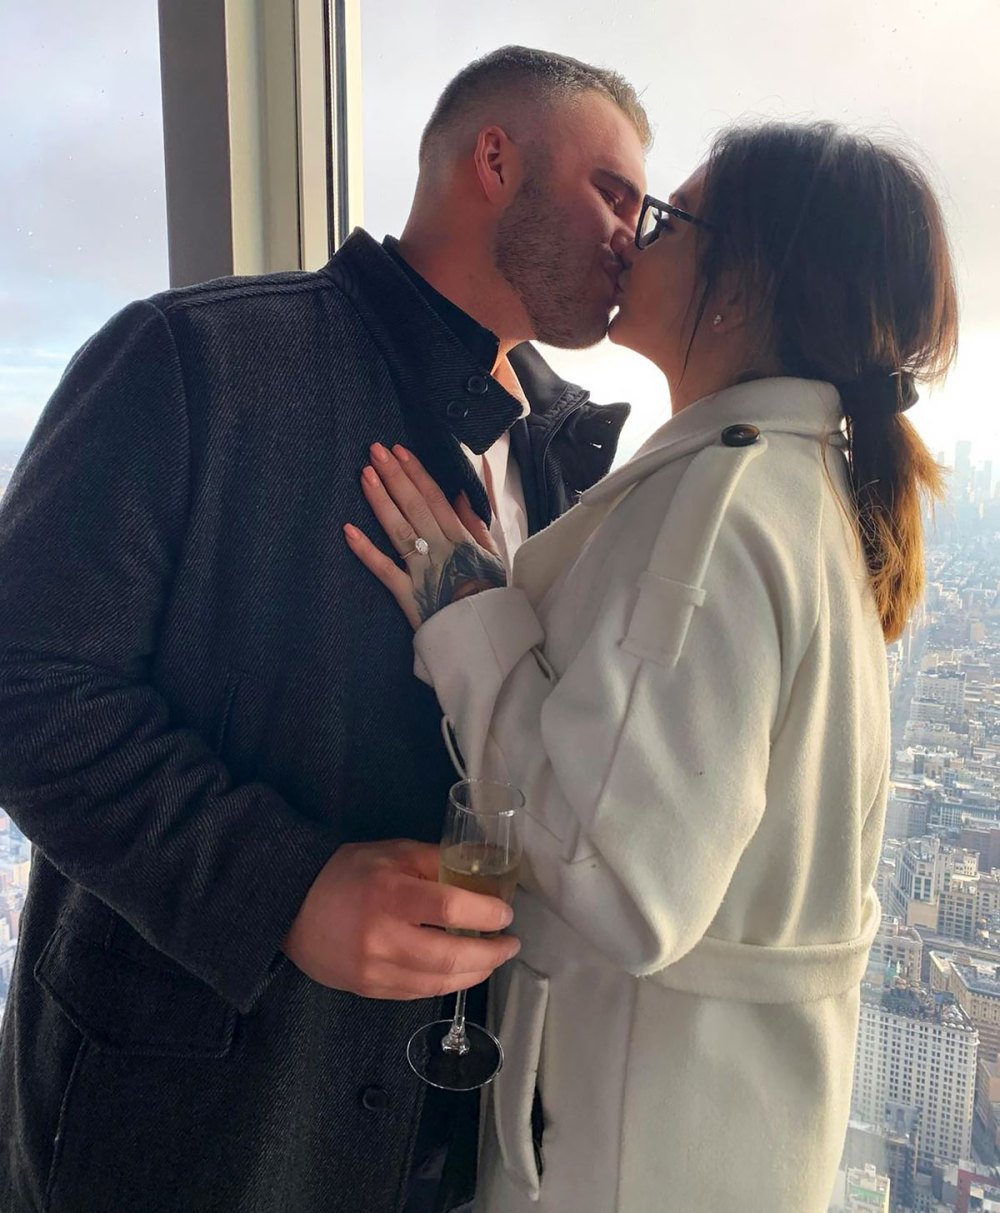 JWoww's Ex Roger Mathews Reacts to Her Engagement to Zack Carpinello